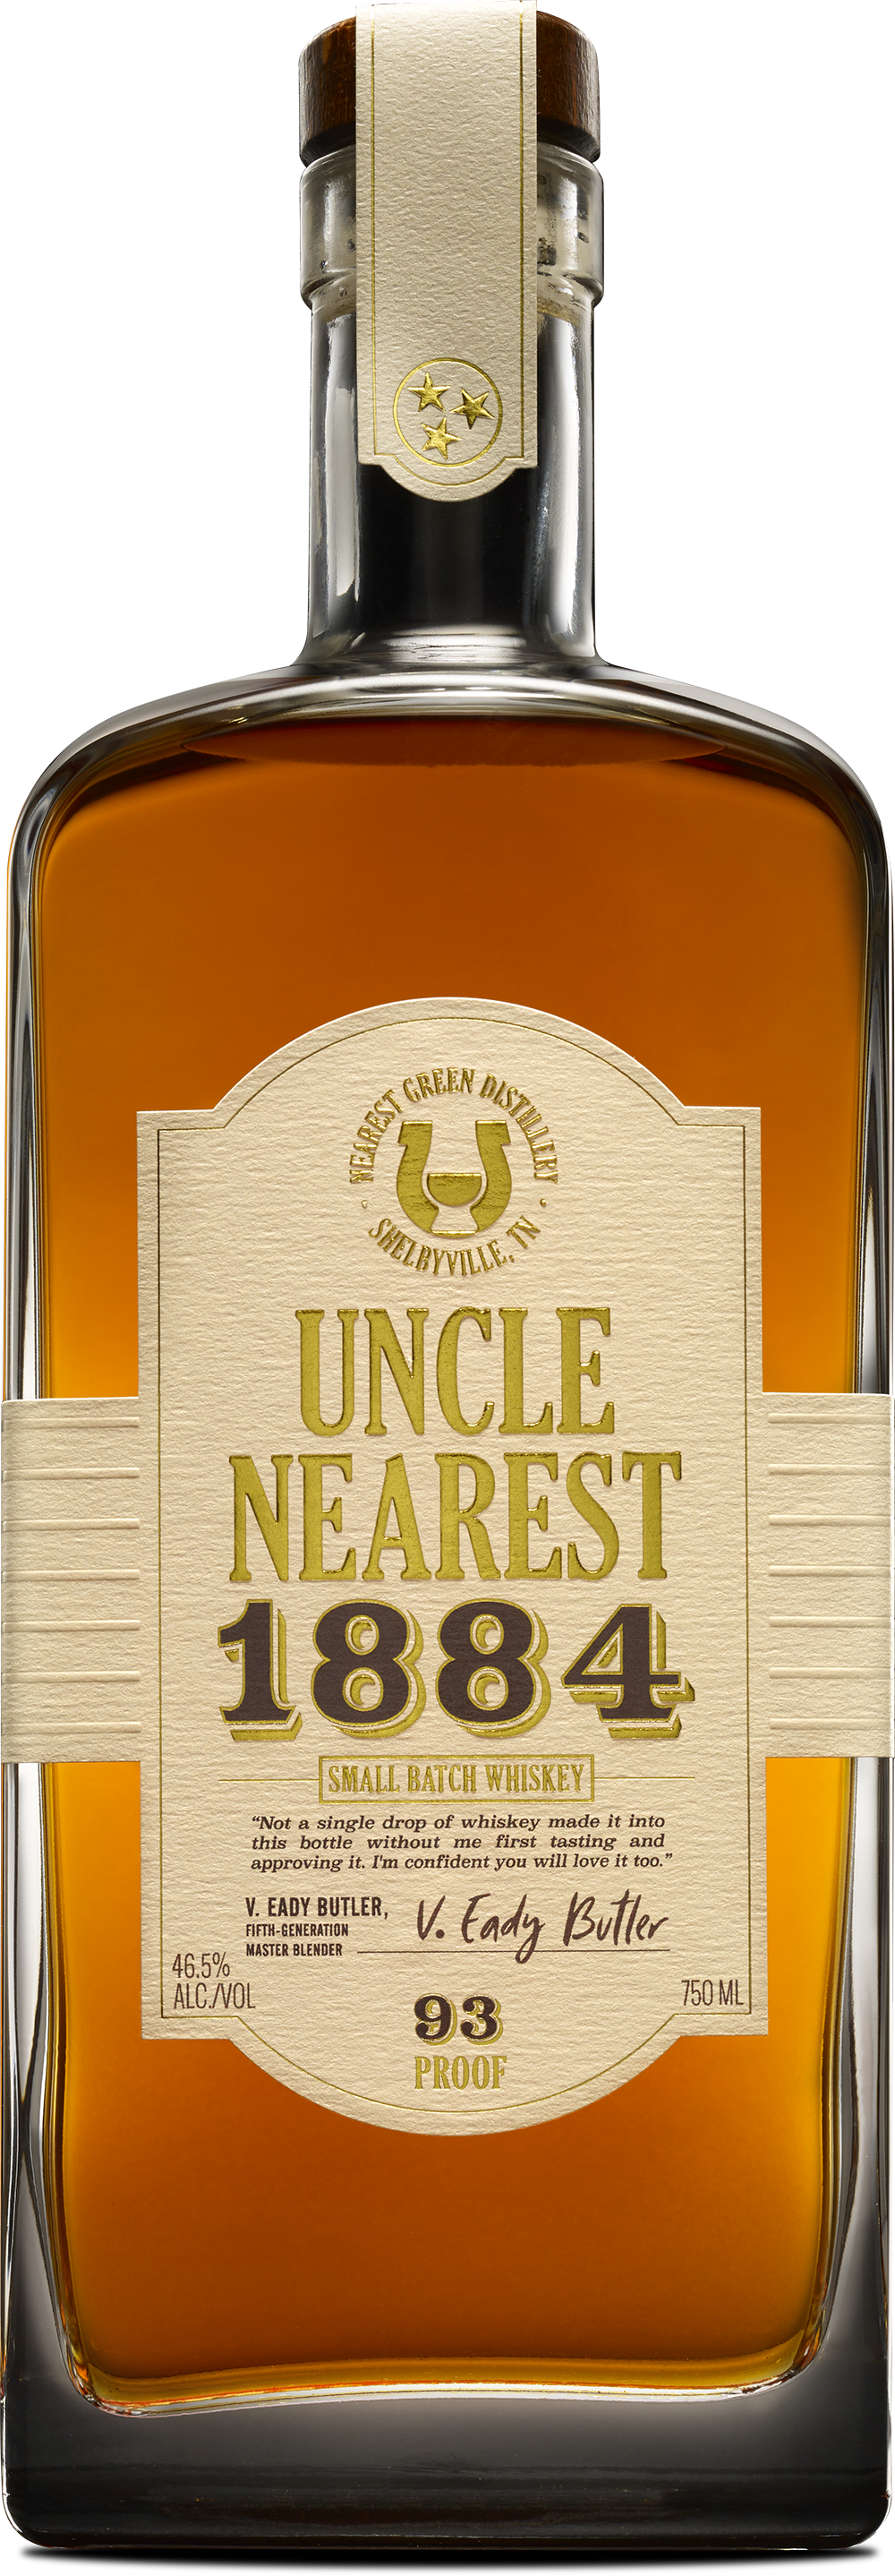 Uncle Nearest 1884 Small Batch Aged Whiskey